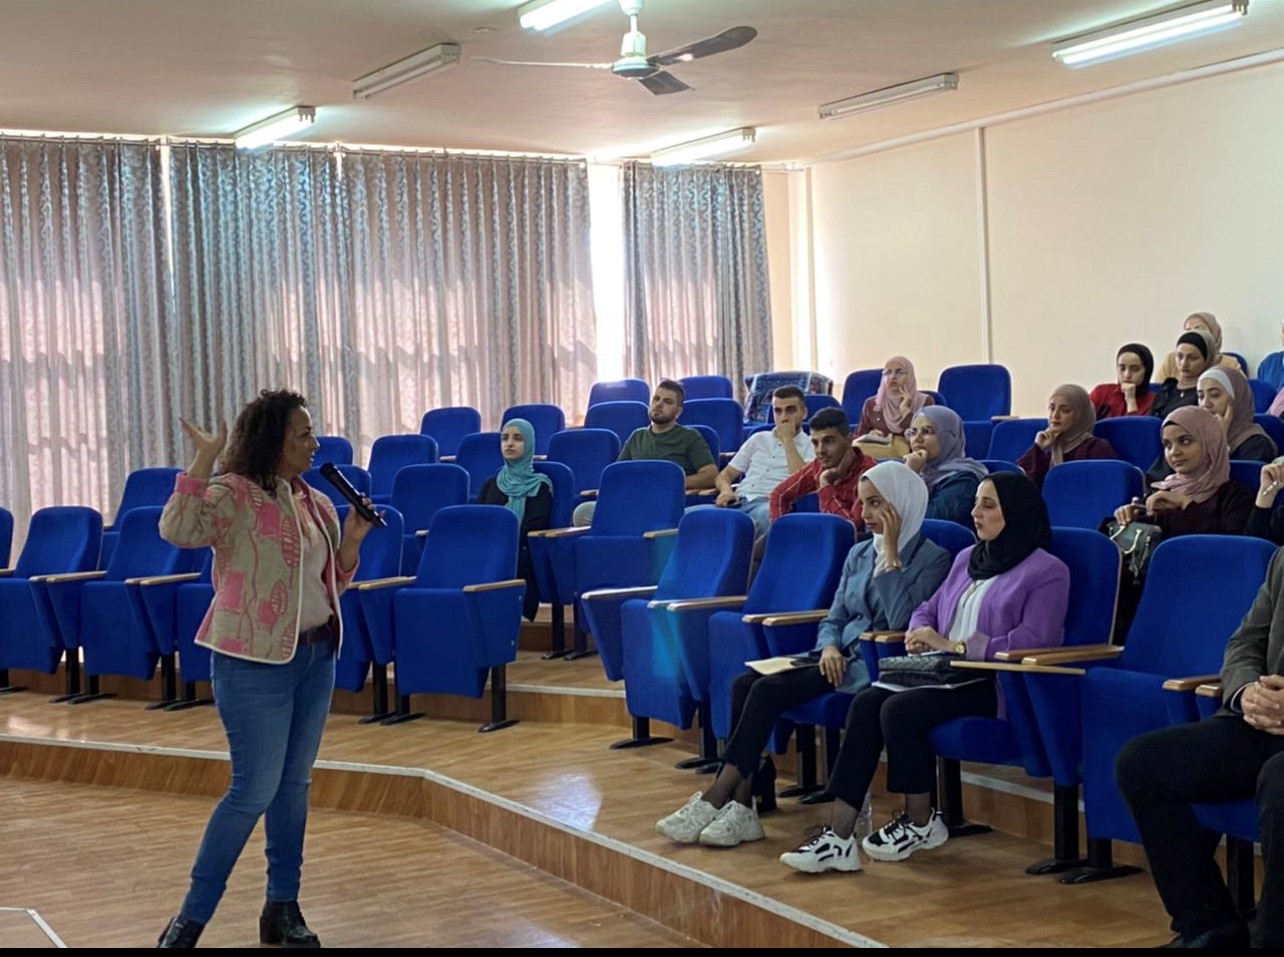 Hassib Sabbagh Center in AAUP and Under Collaboration with the Faculty of Engineering and IT and IEEE Organize a Workshop Entitled “Investable Ideas” Related to DocTech Competition